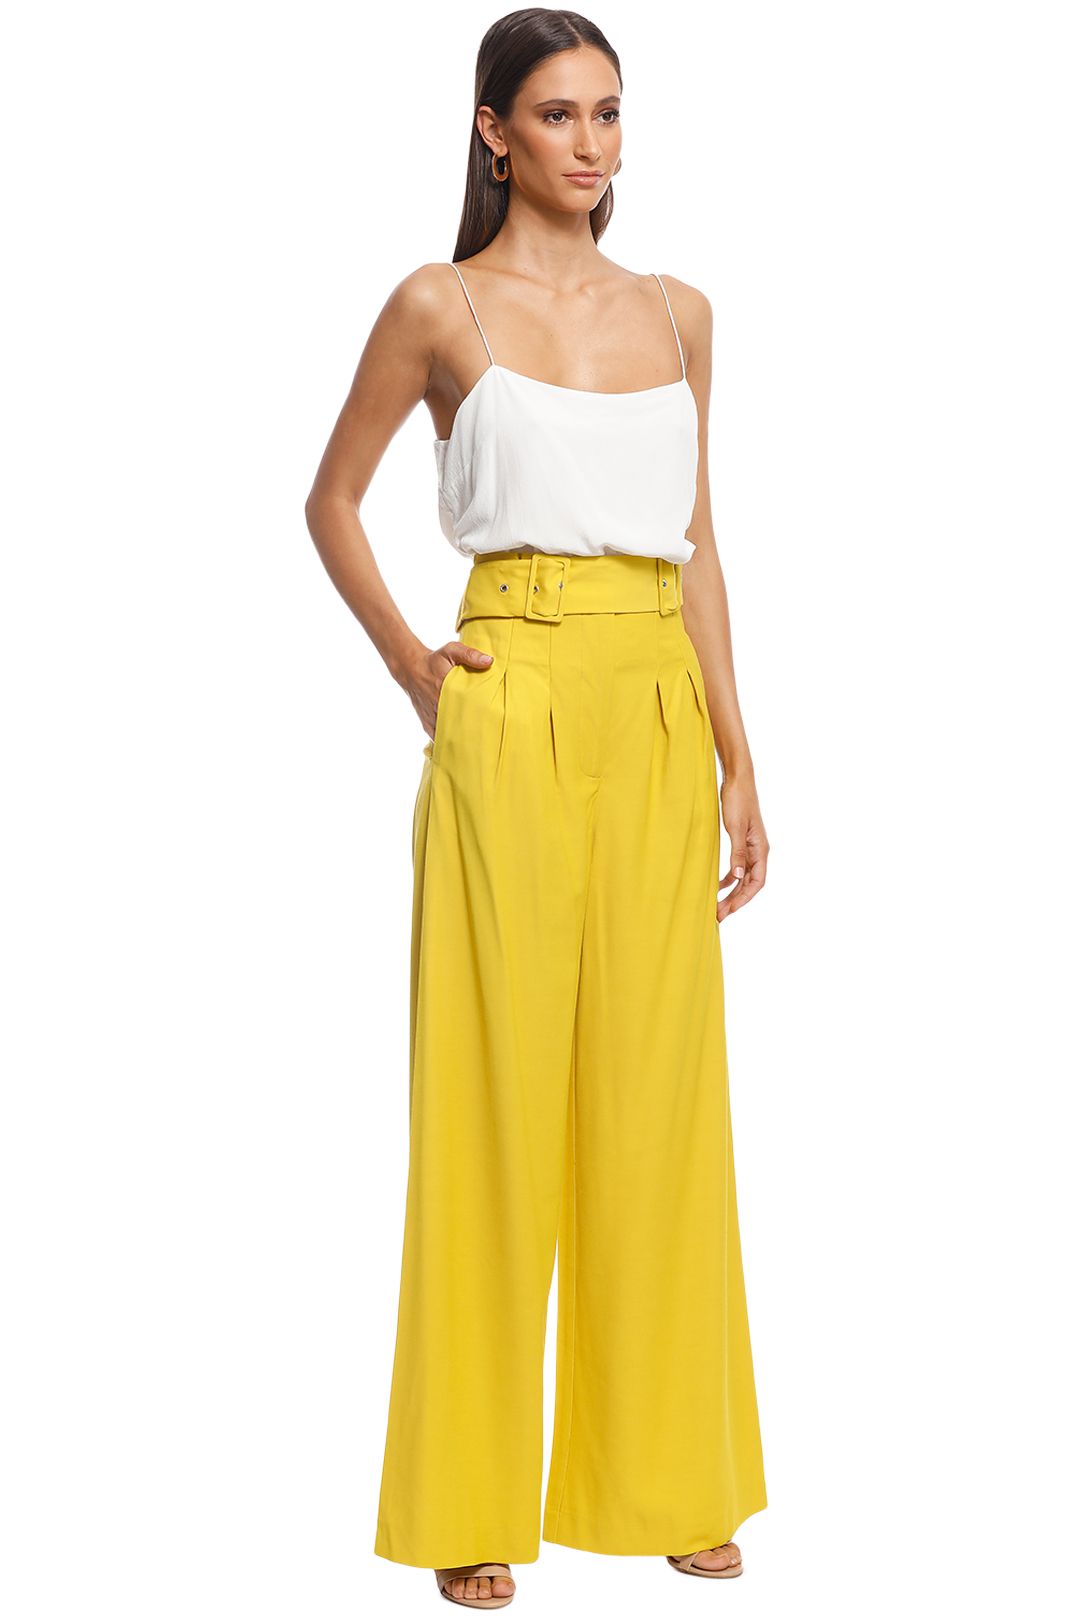 CMEO Collective - Silenced Pant - Yellow - Side